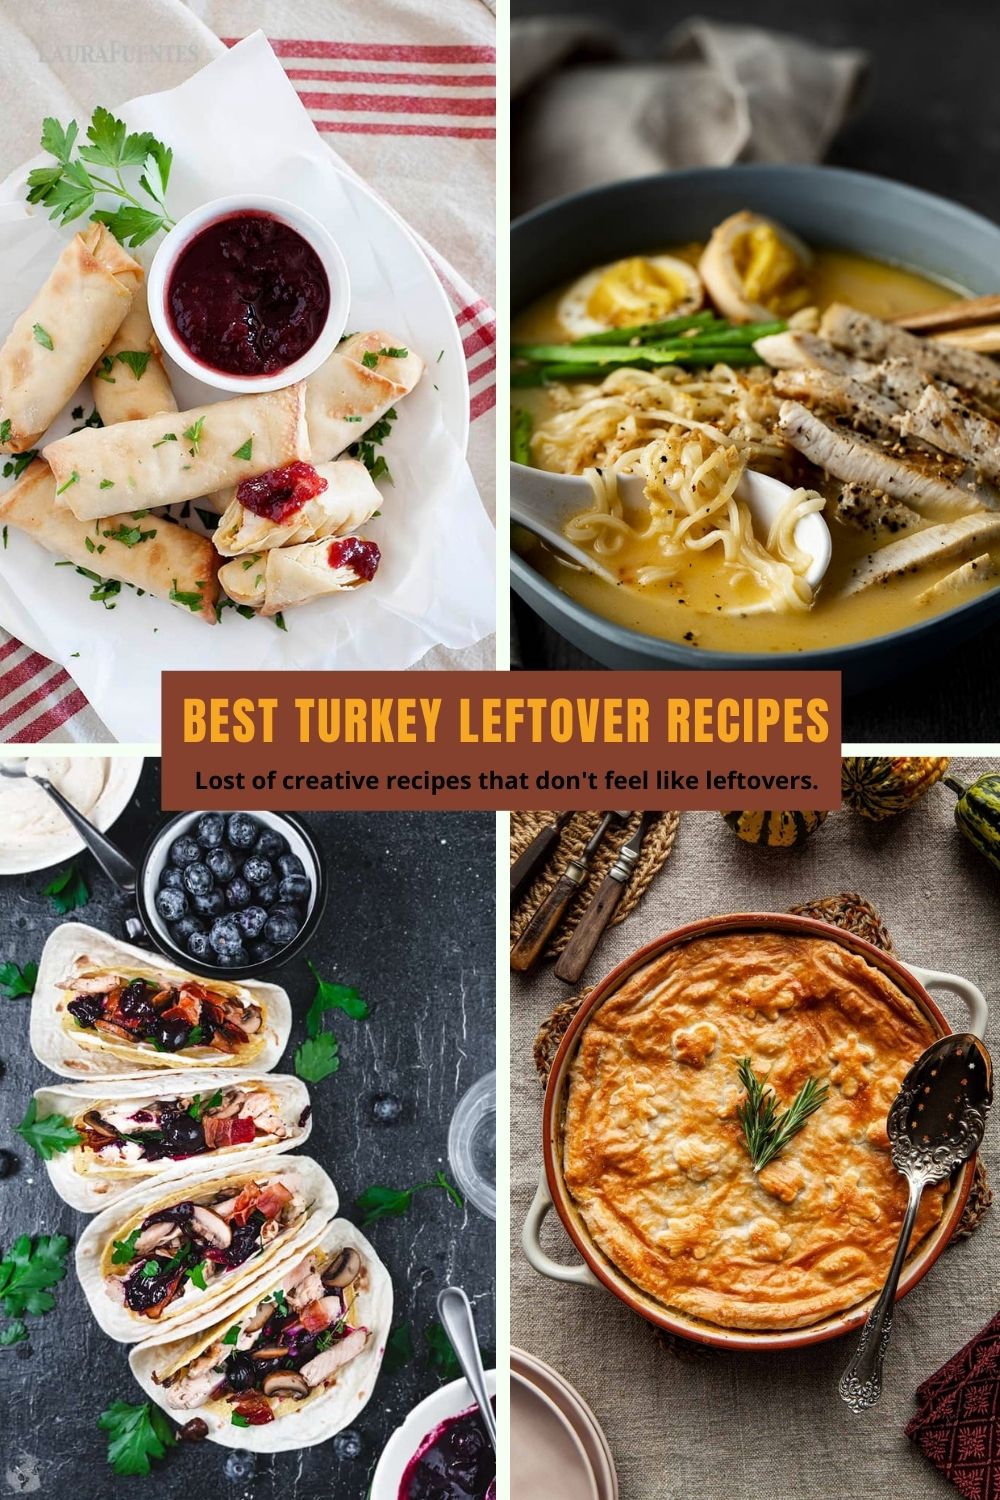 The best Thanksgiving turkey leftover recipes